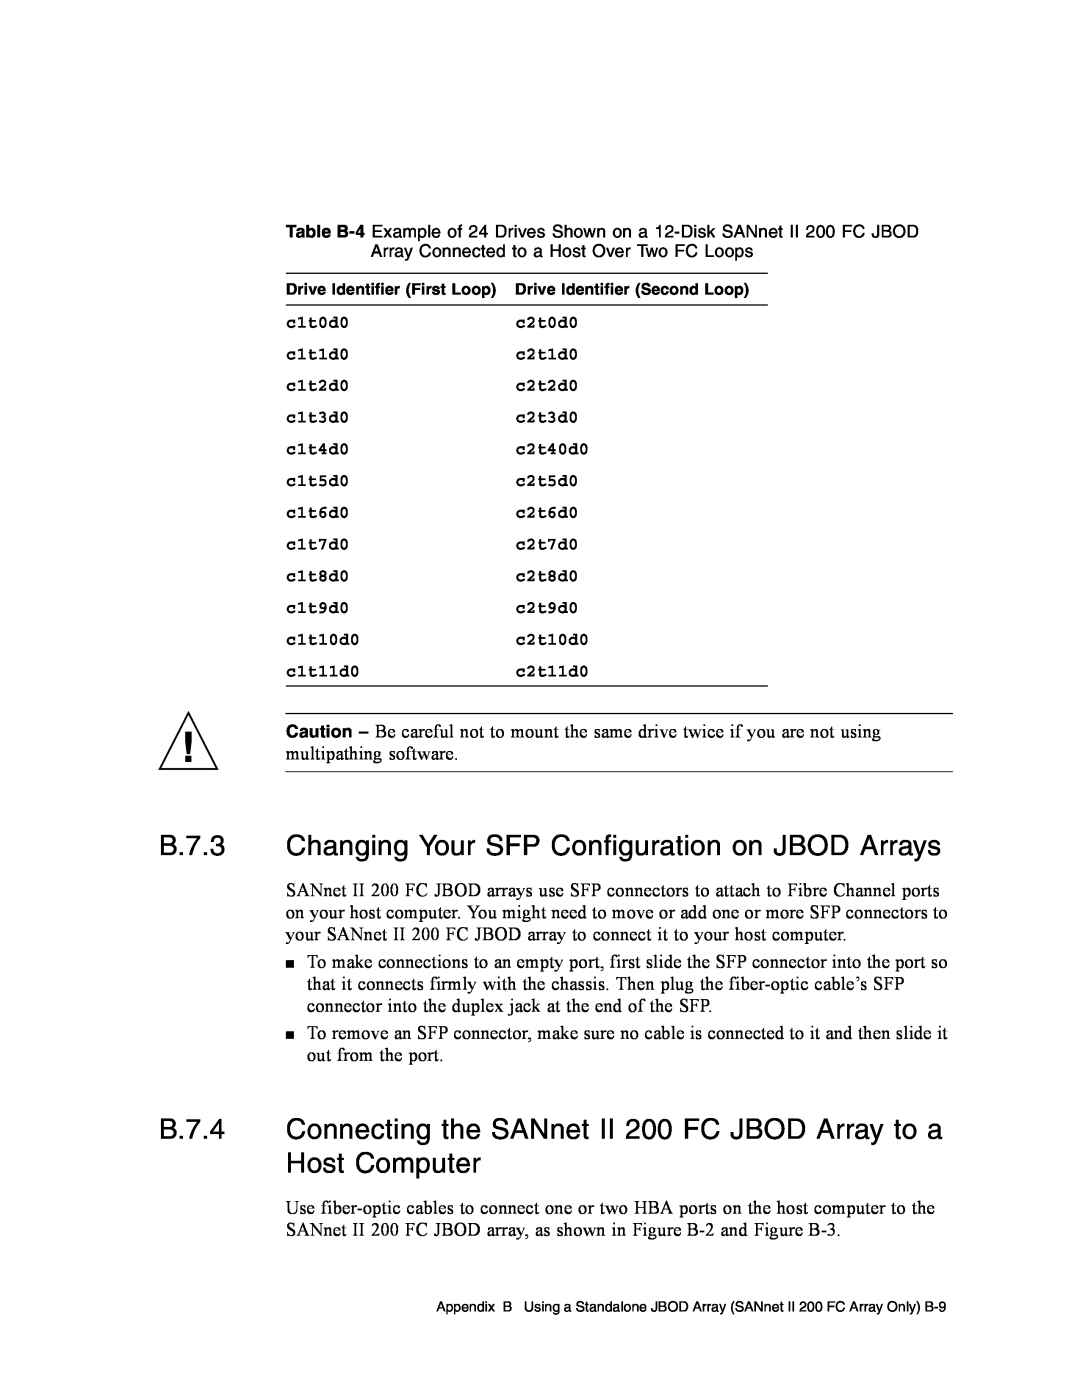 Dot Hill Systems II 200 FC service manual B.7.3 Changing Your SFP Configuration on JBOD Arrays 